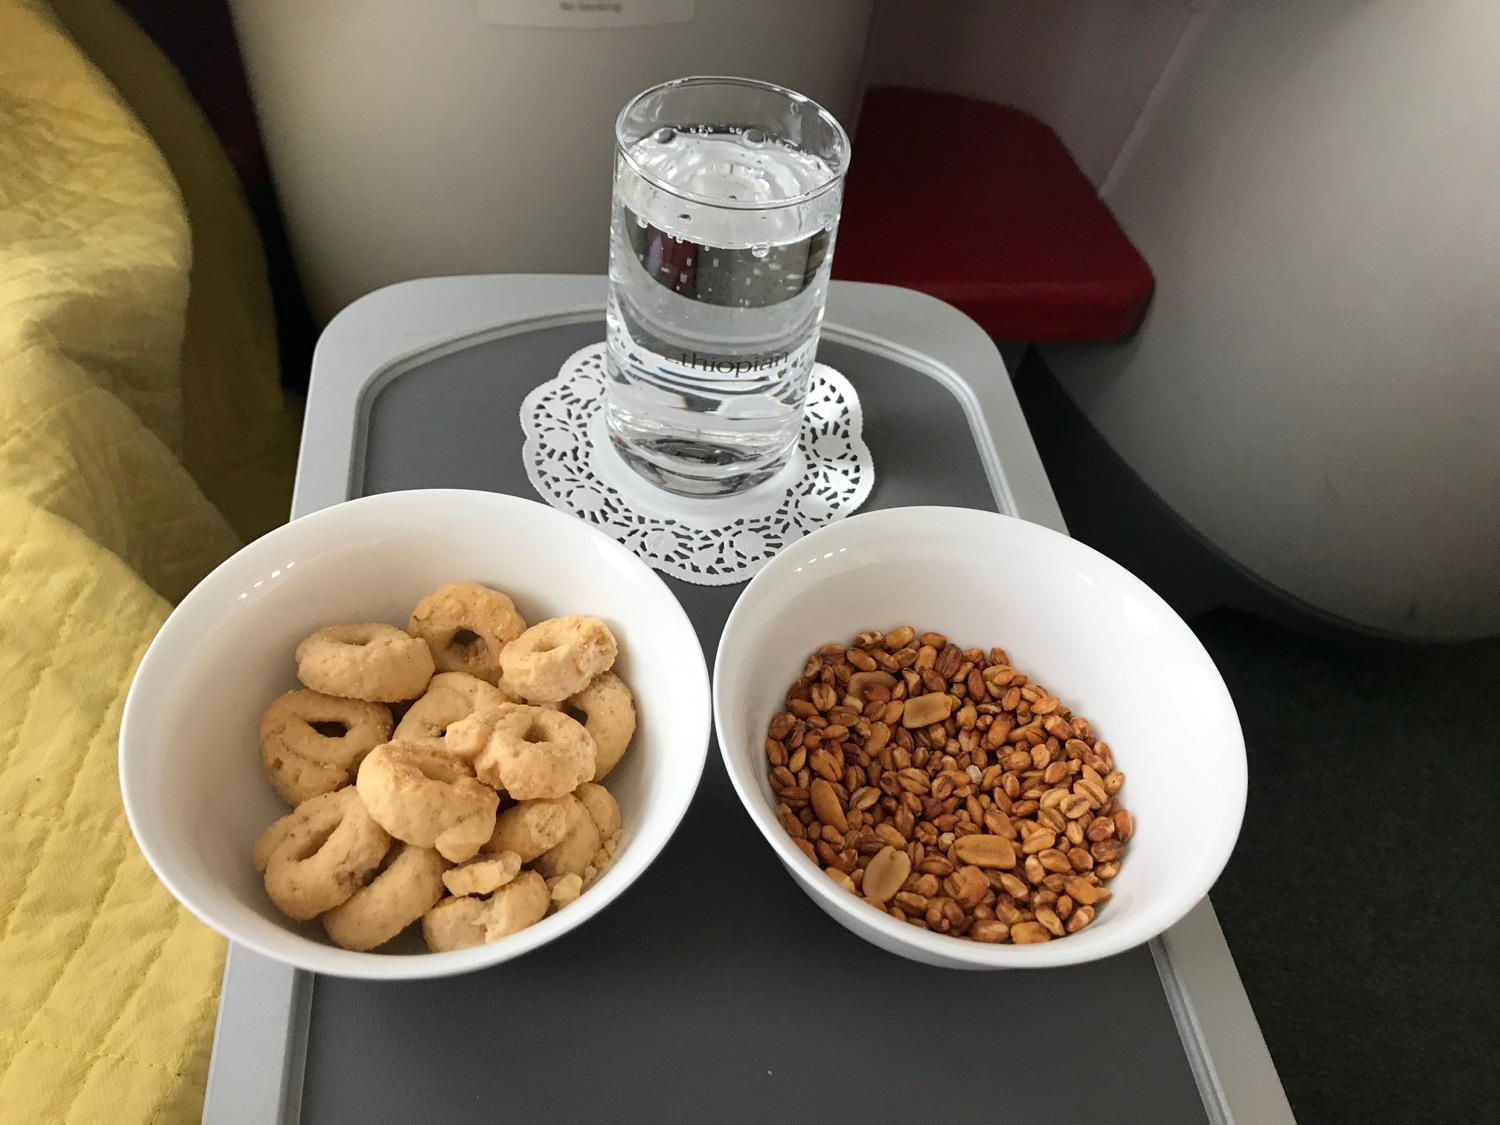 a bowl of cereal and nuts on a tray